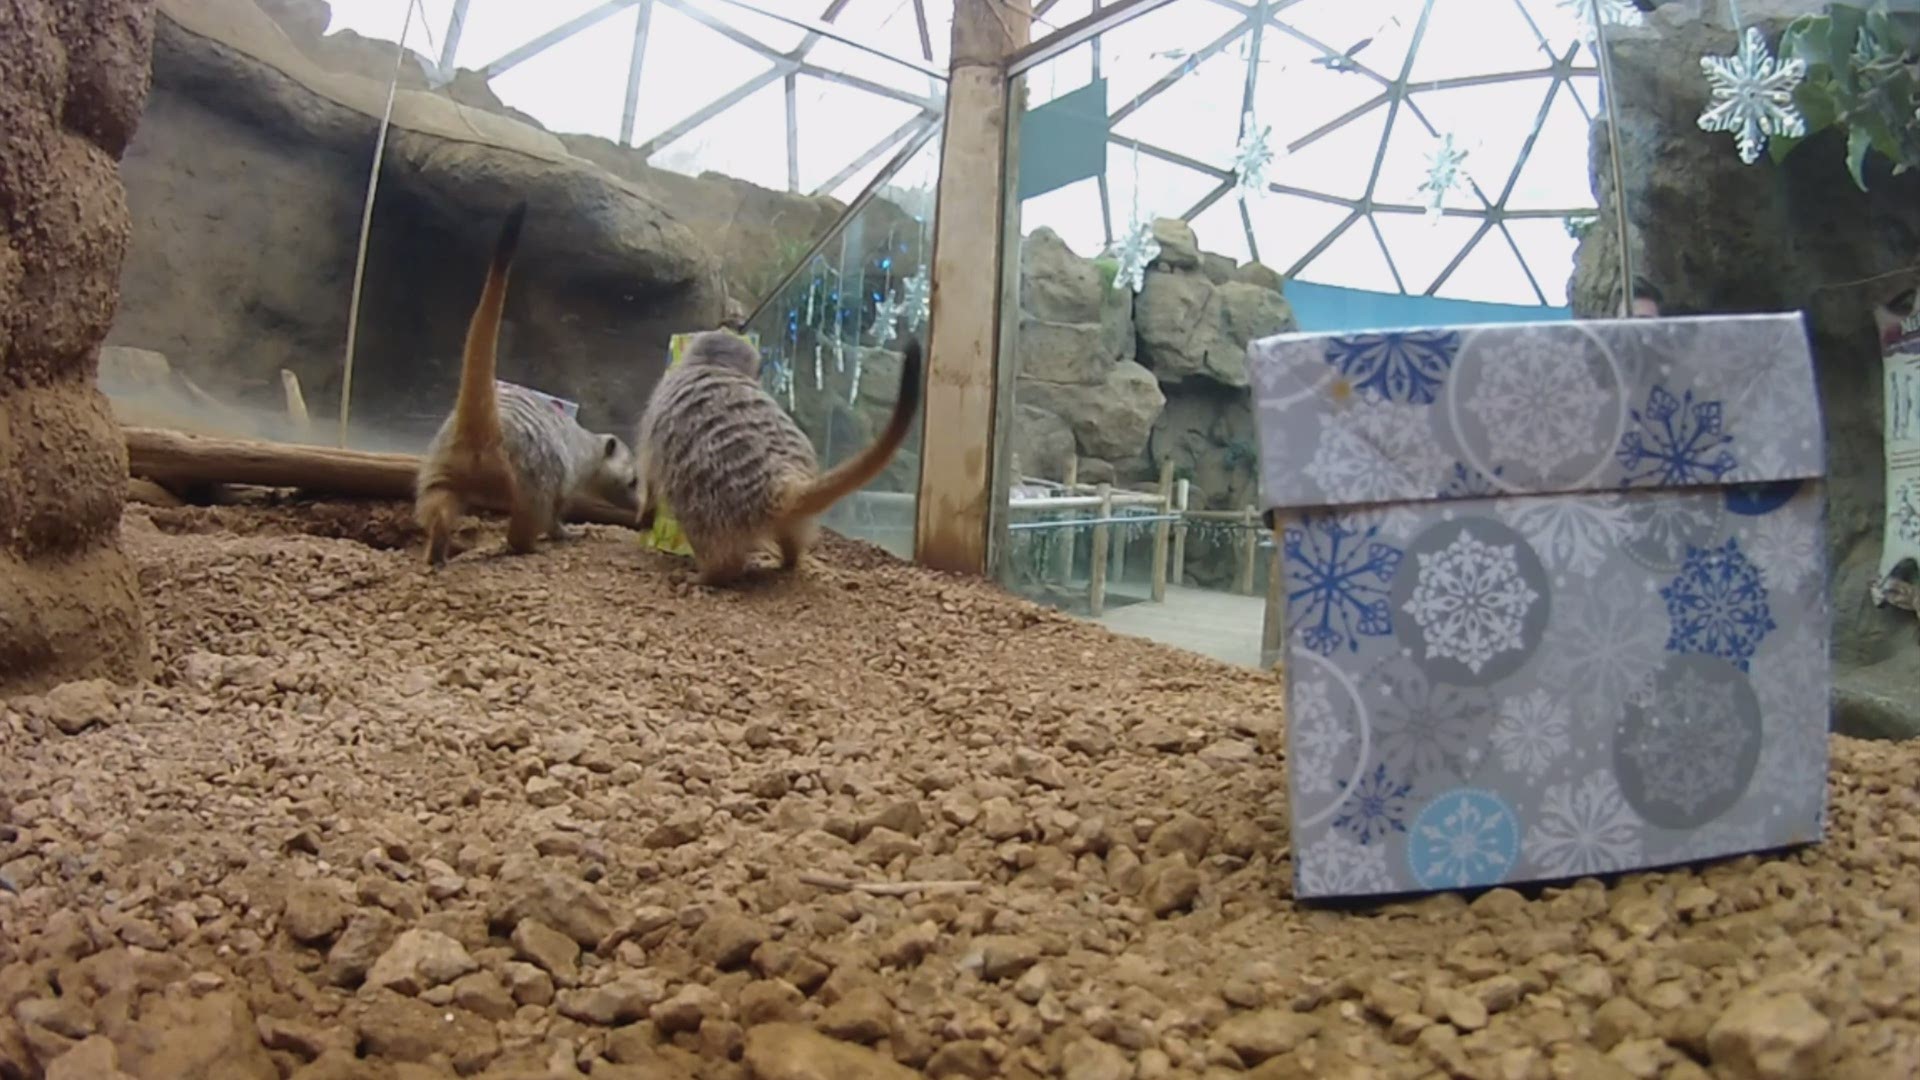 Meerkats opened their favorite gifts on Christmas Day.